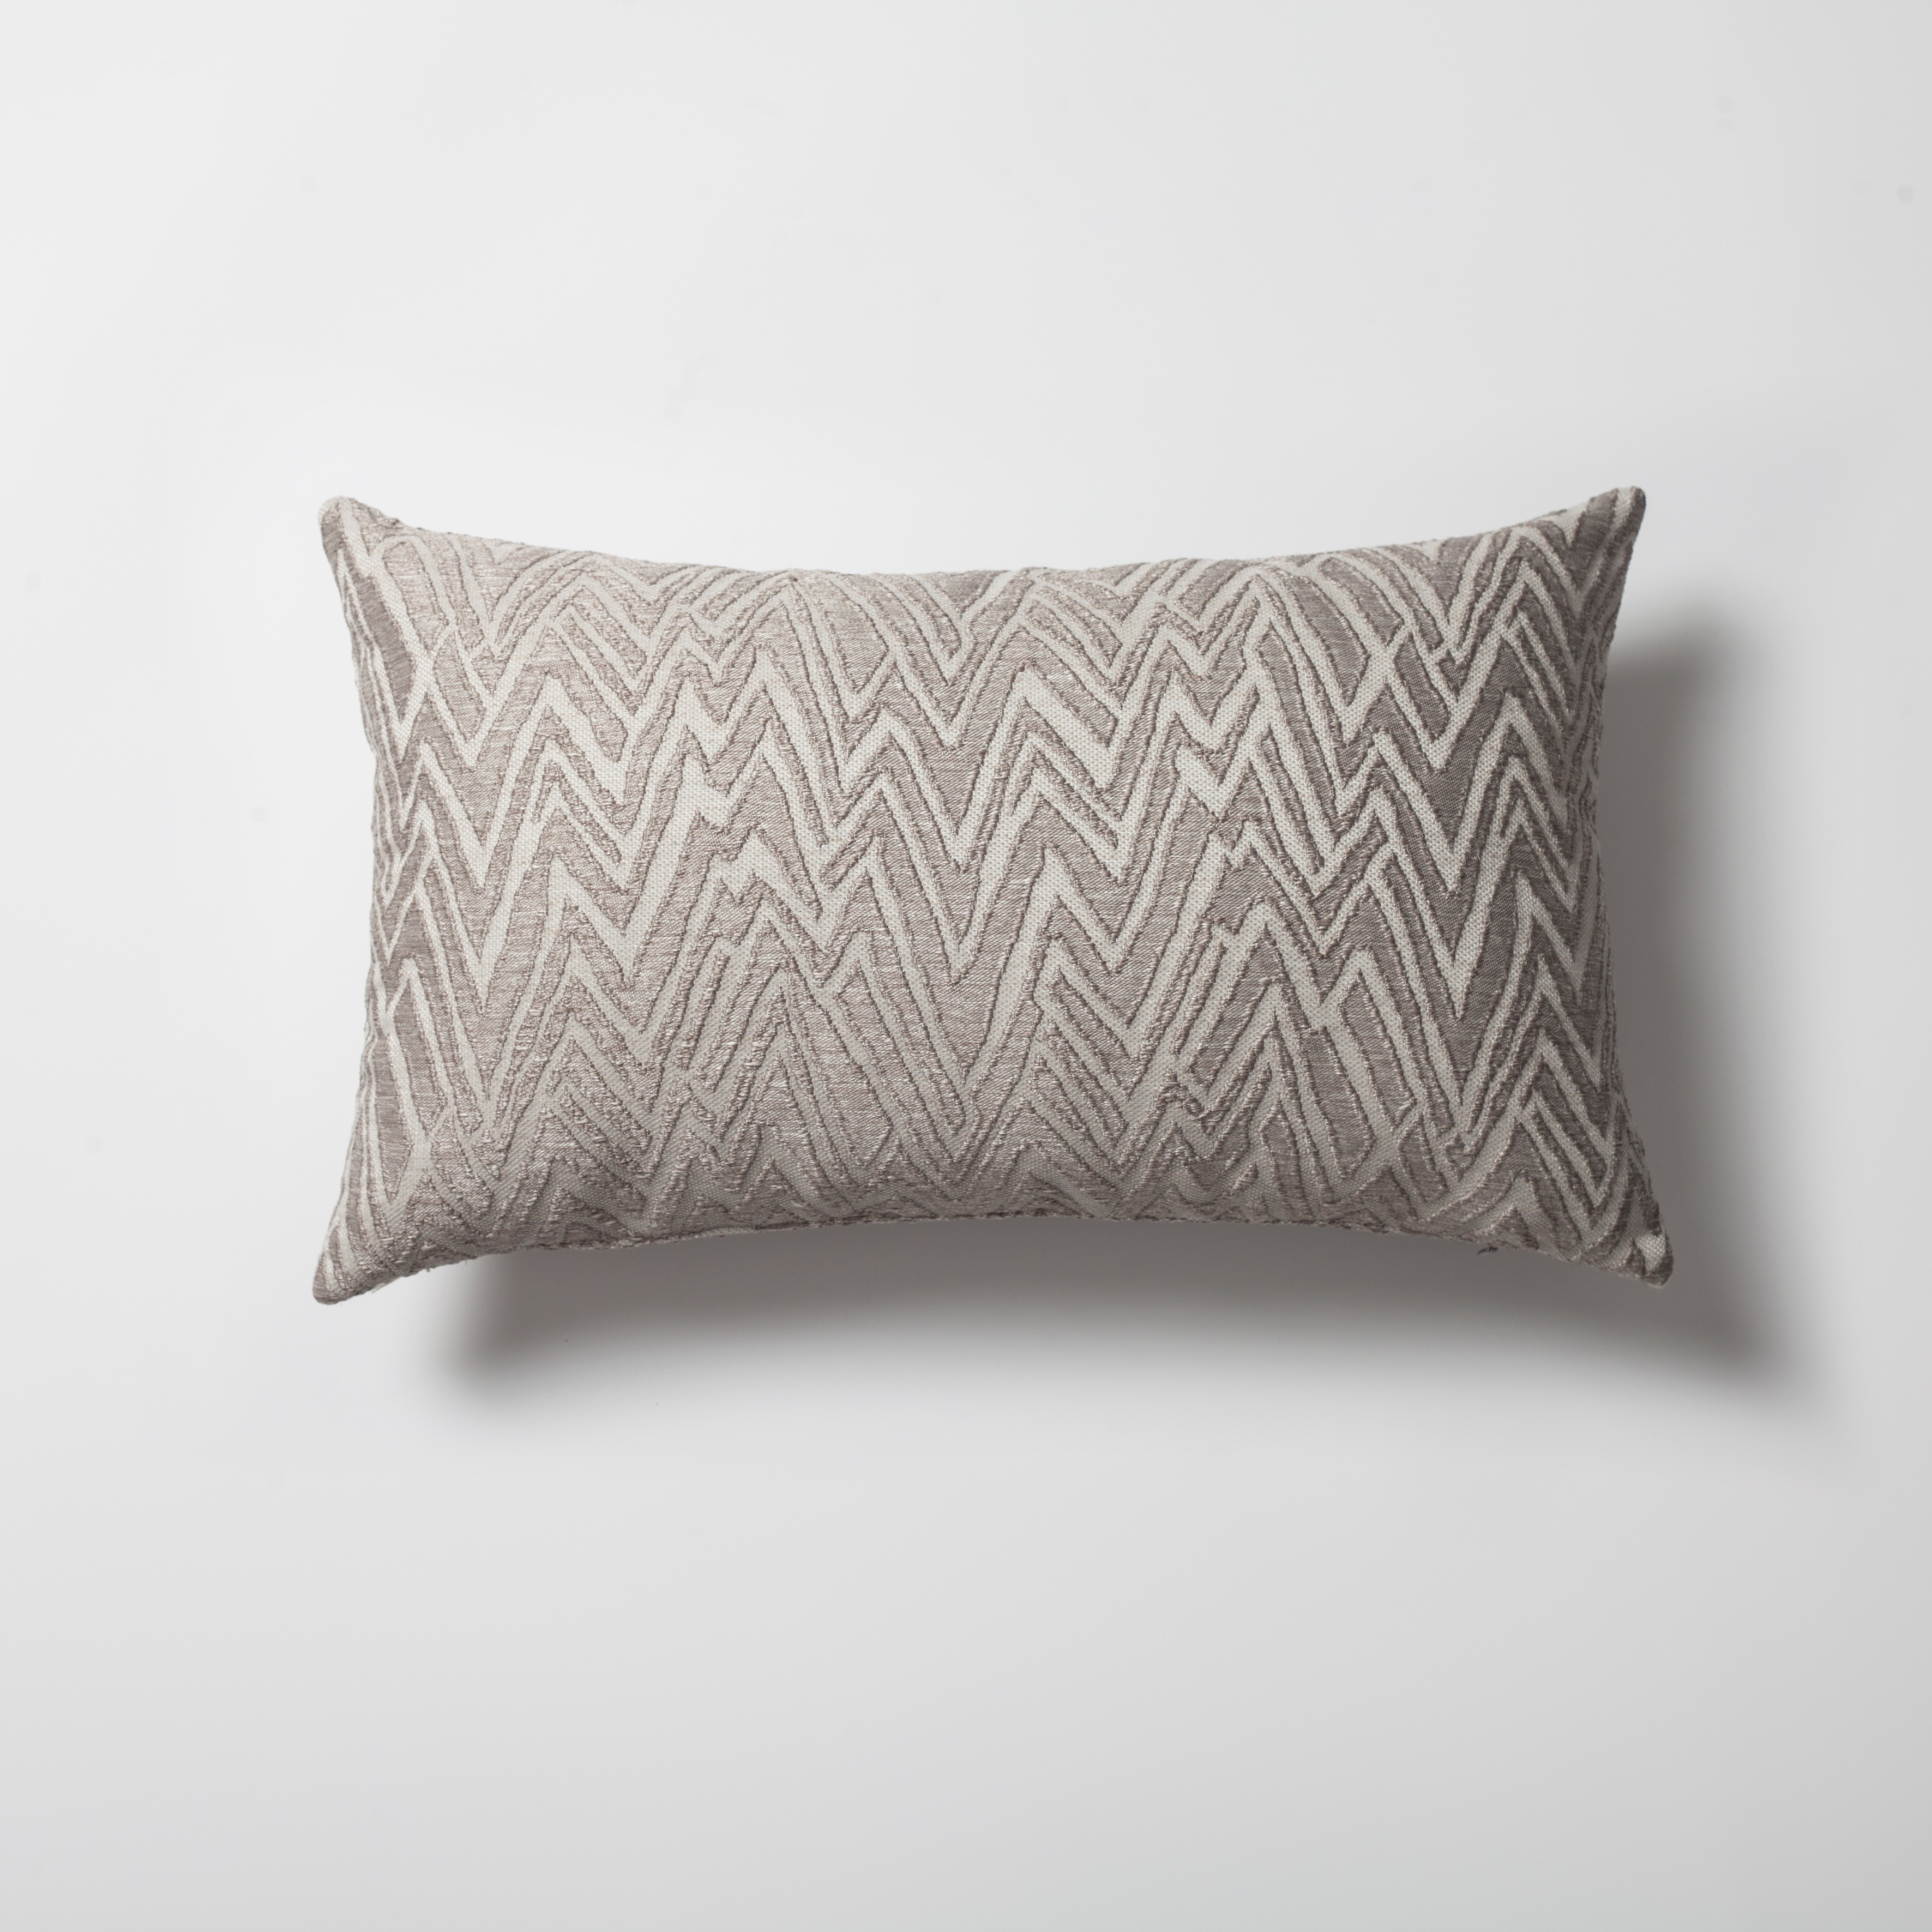 "Viva" - Grey Embroidered Effect Zigzag Patterned Pillow 18x18 Inch - Grey (Cover Only)